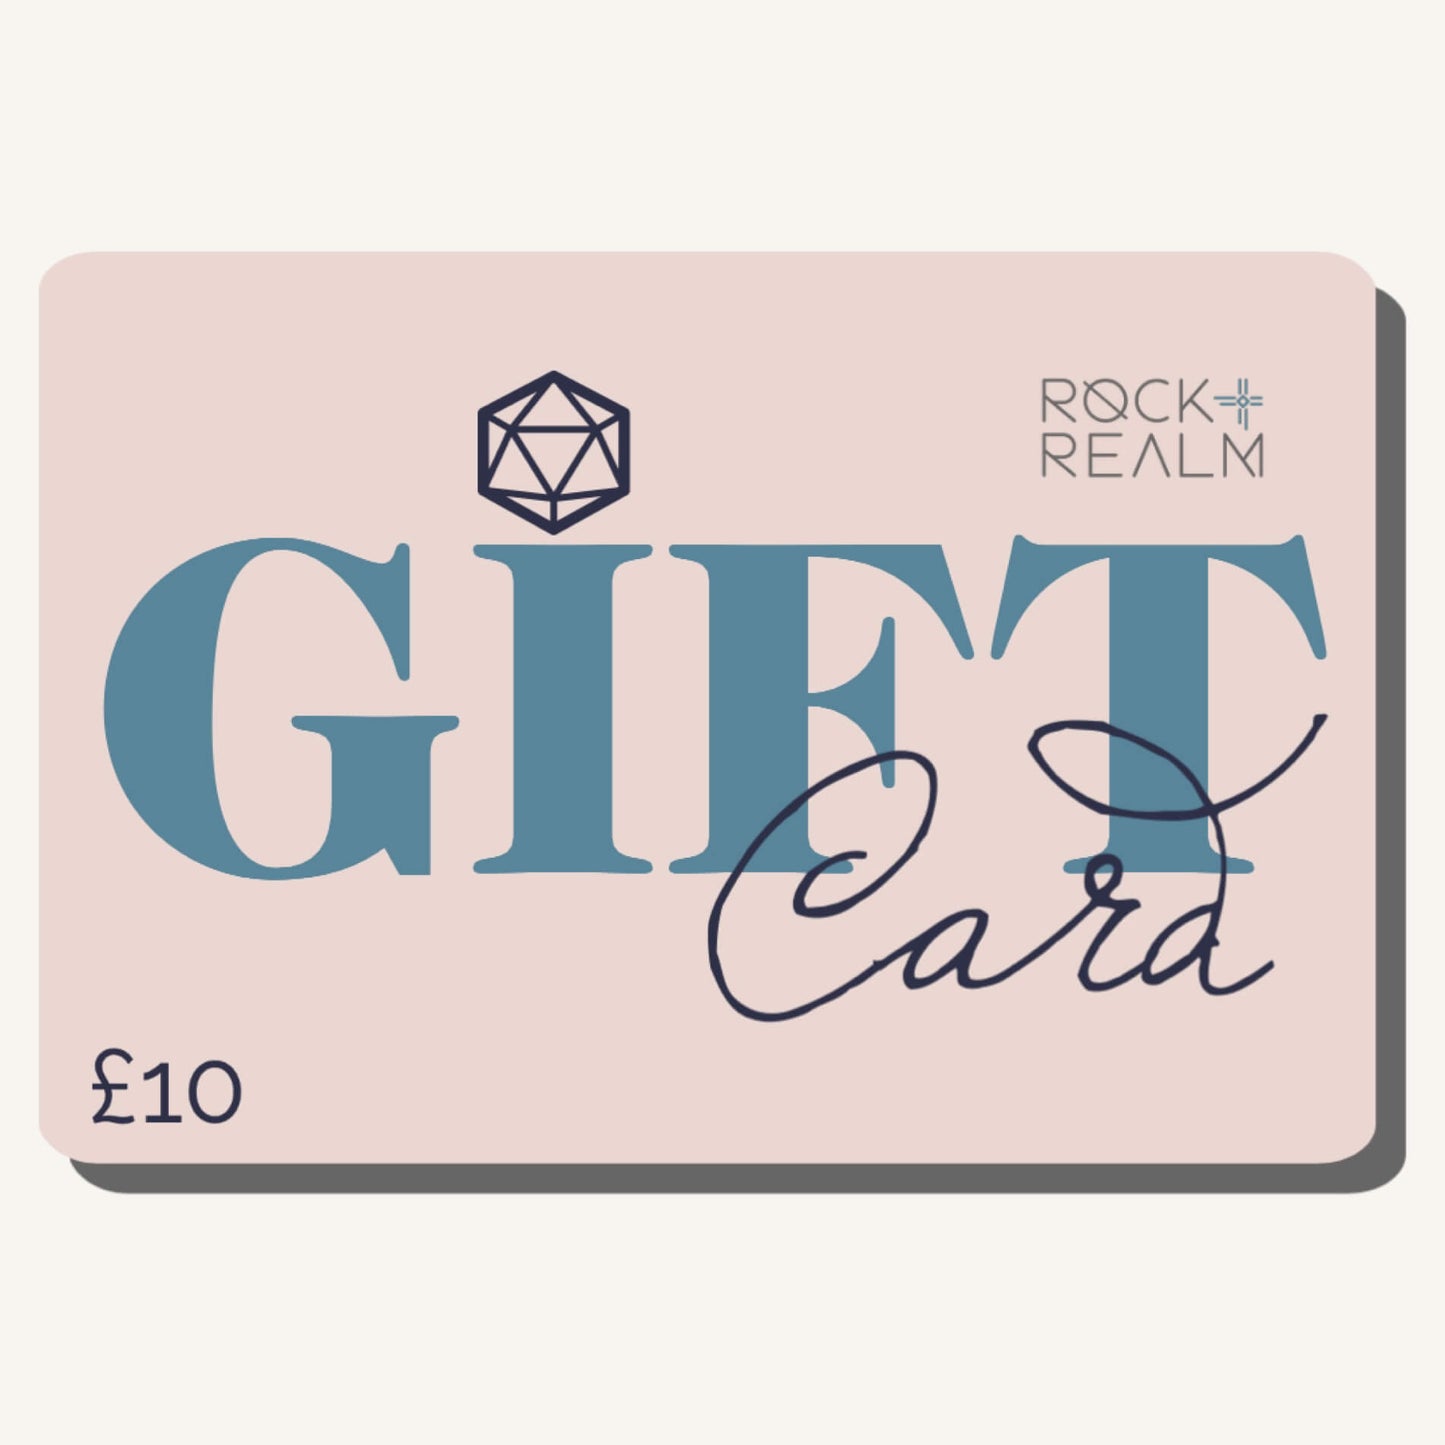 rock and realm £10 gift card picture in pink and blue